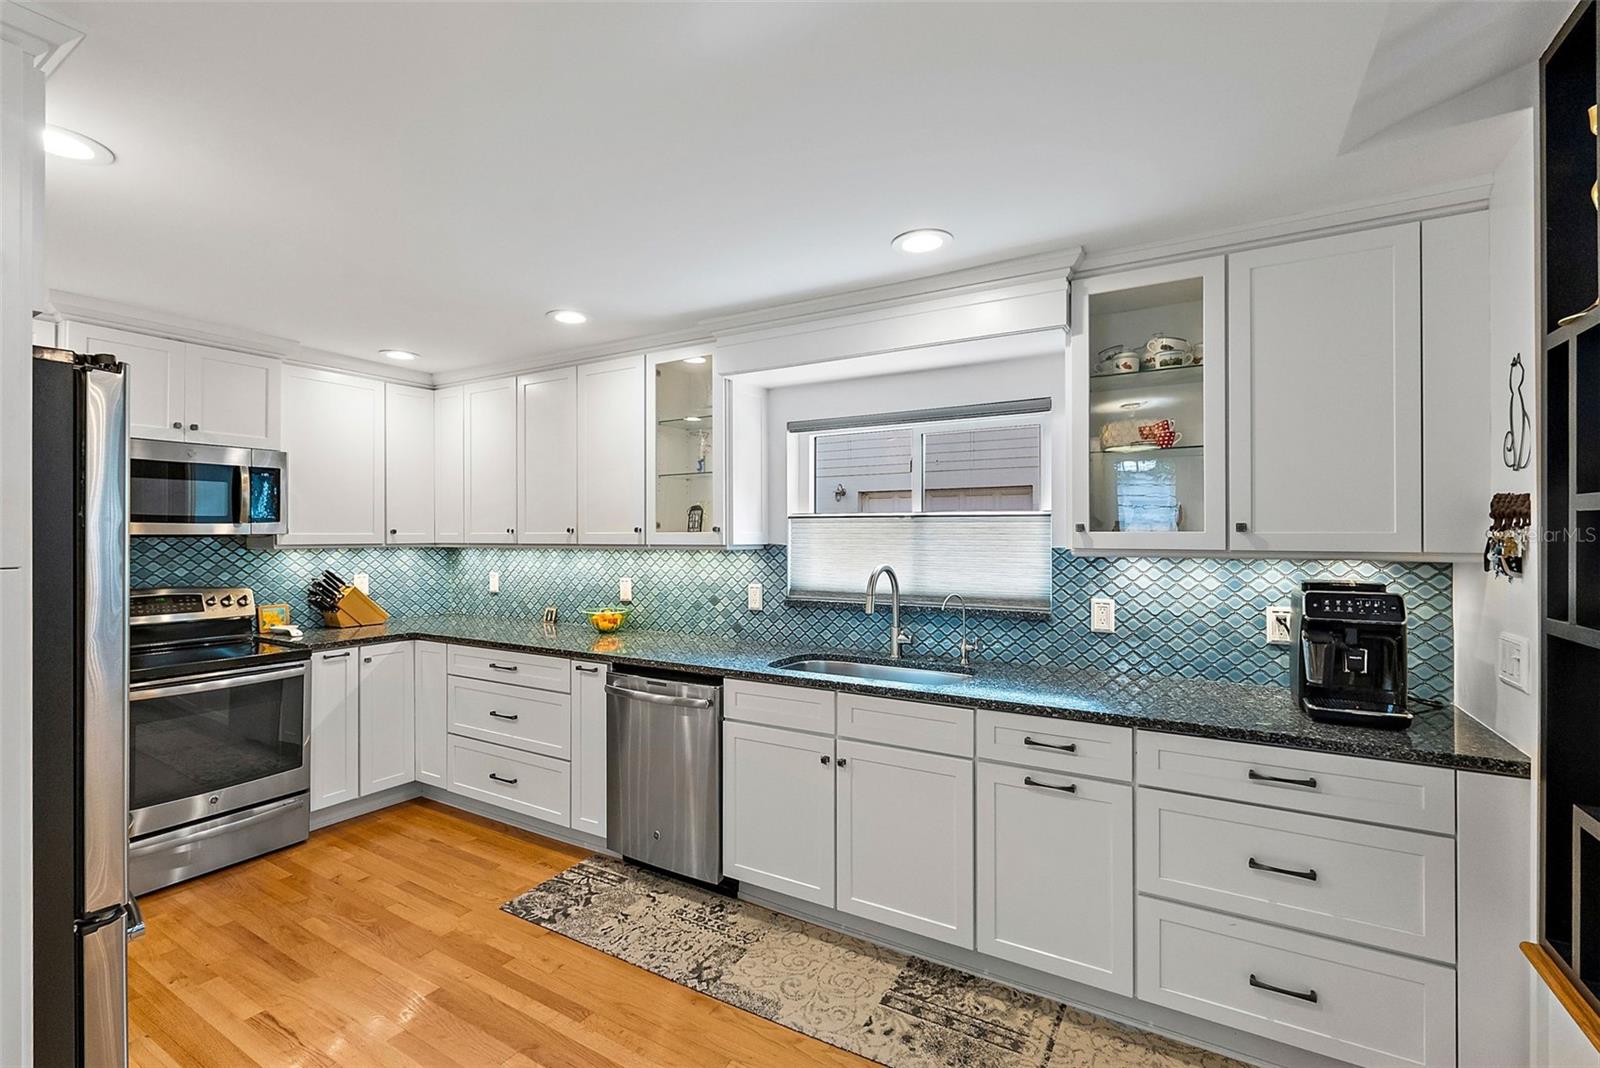 White shaker cabinetry with glass fronts, stone counters, chic backsplash, and recessed lighting.